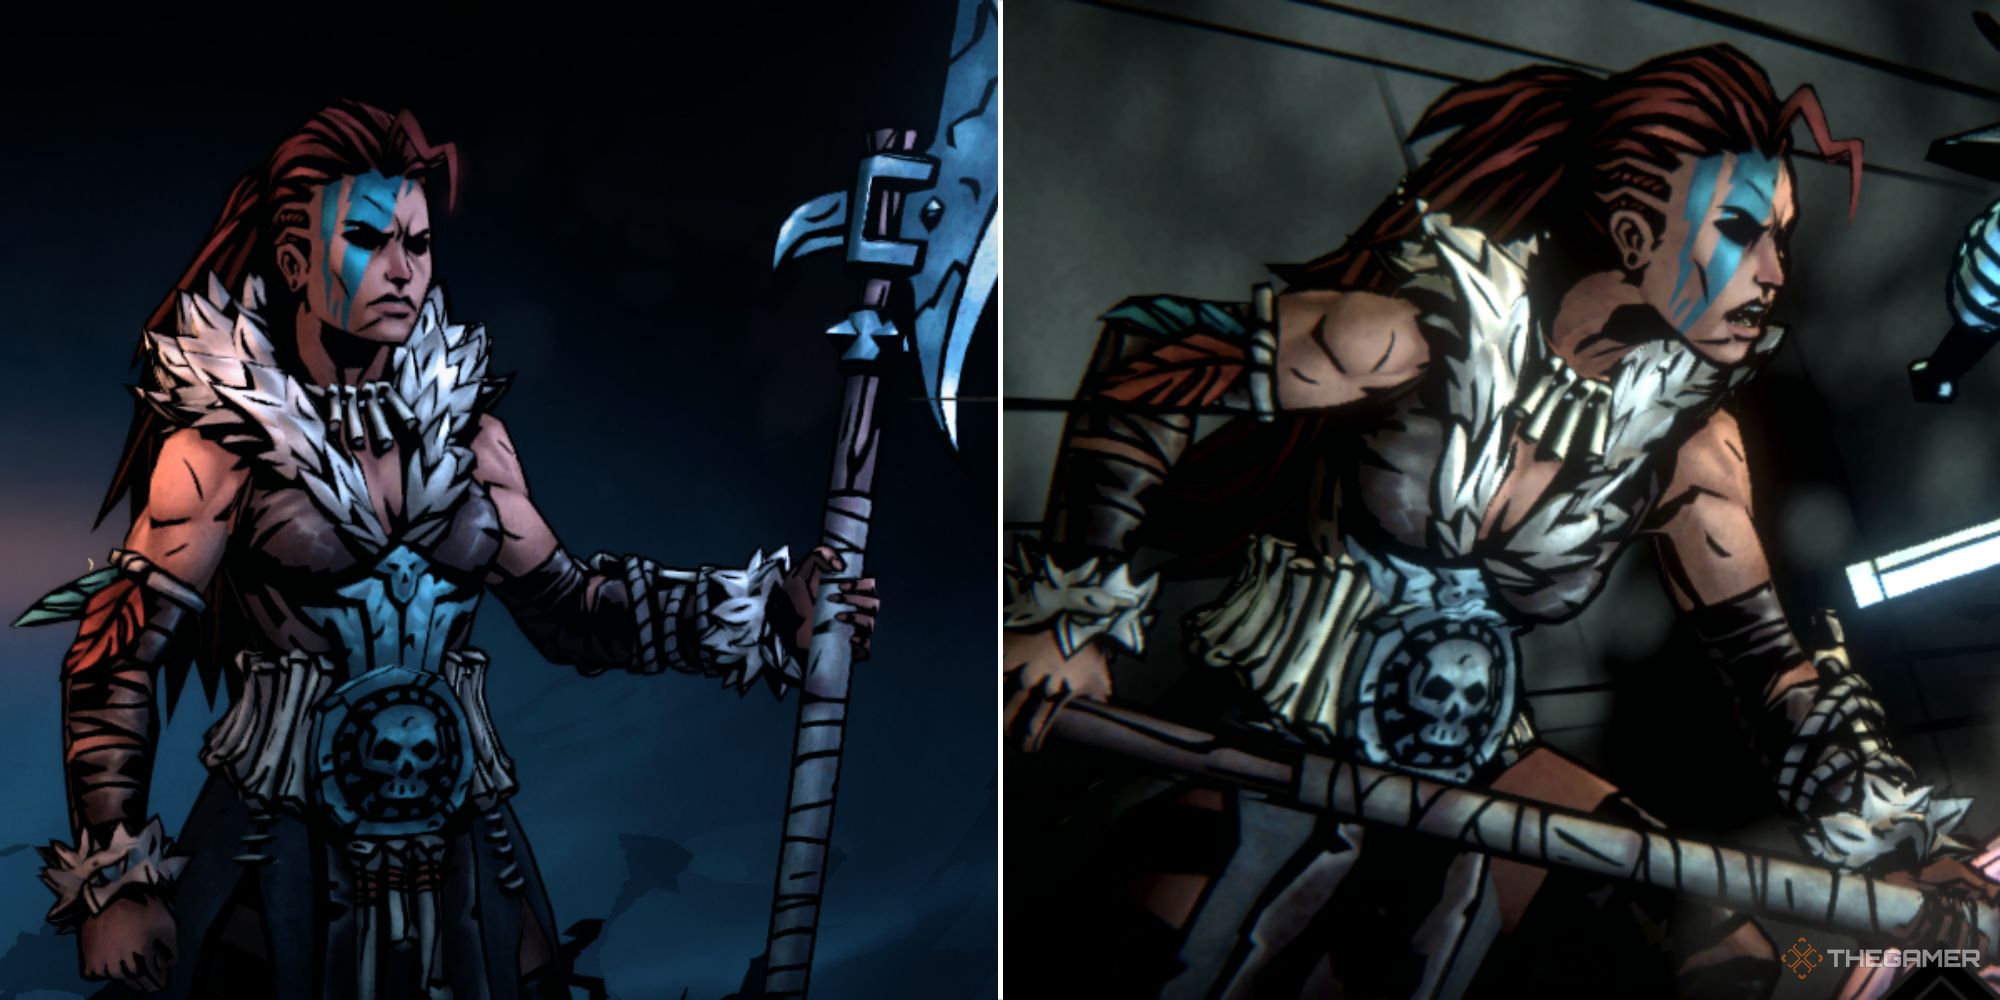 The Hellion, at the crossroads and in combat, in Darkest Dungeon 2